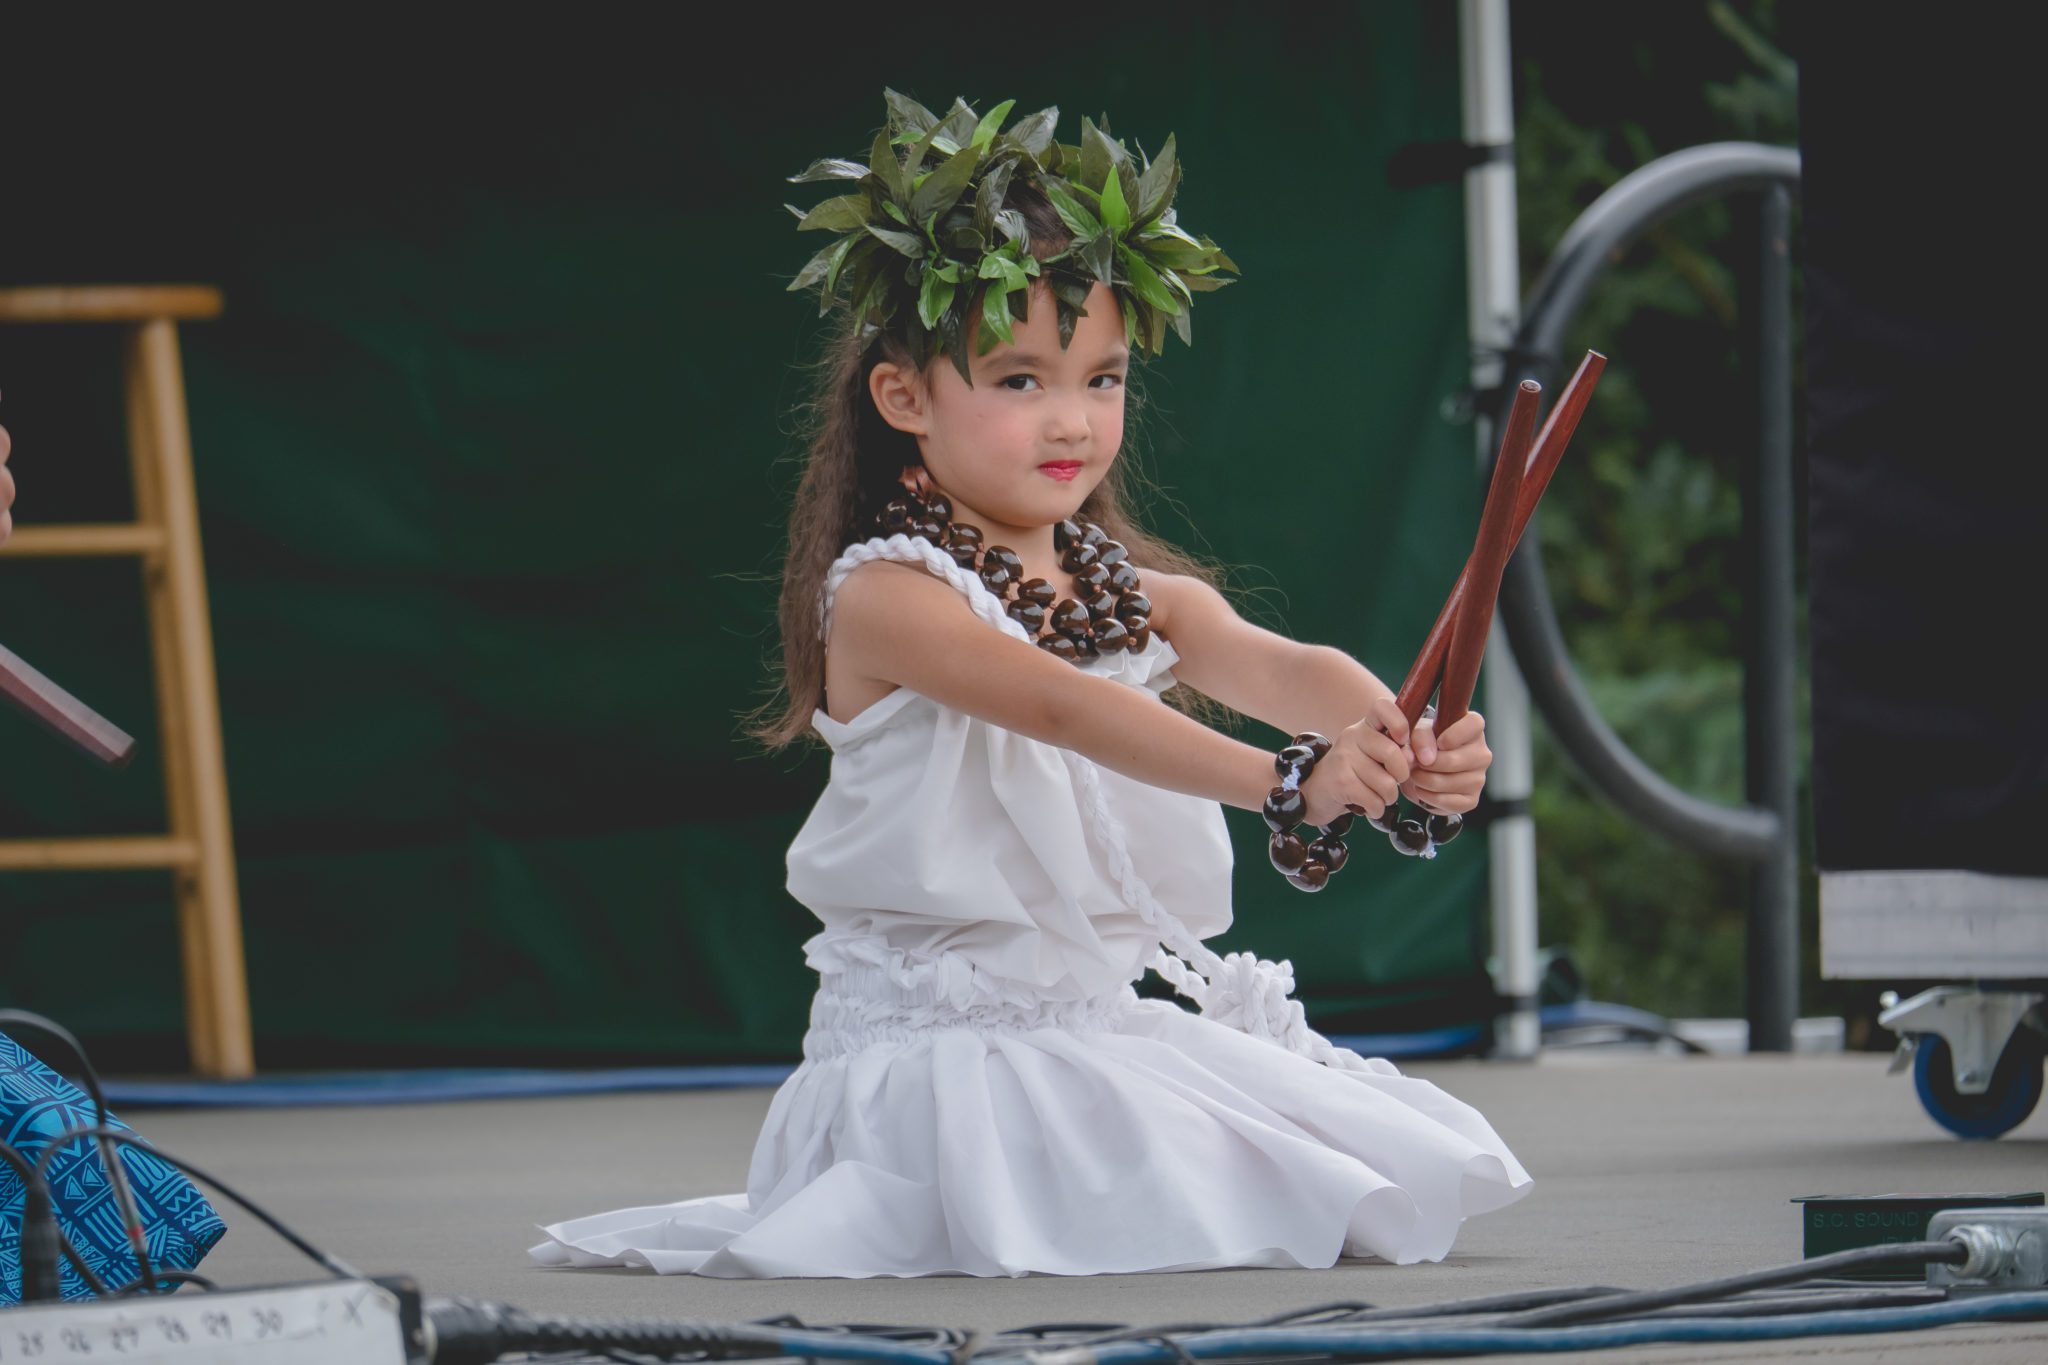 Young girl performer sitting on a stage holding sticks.